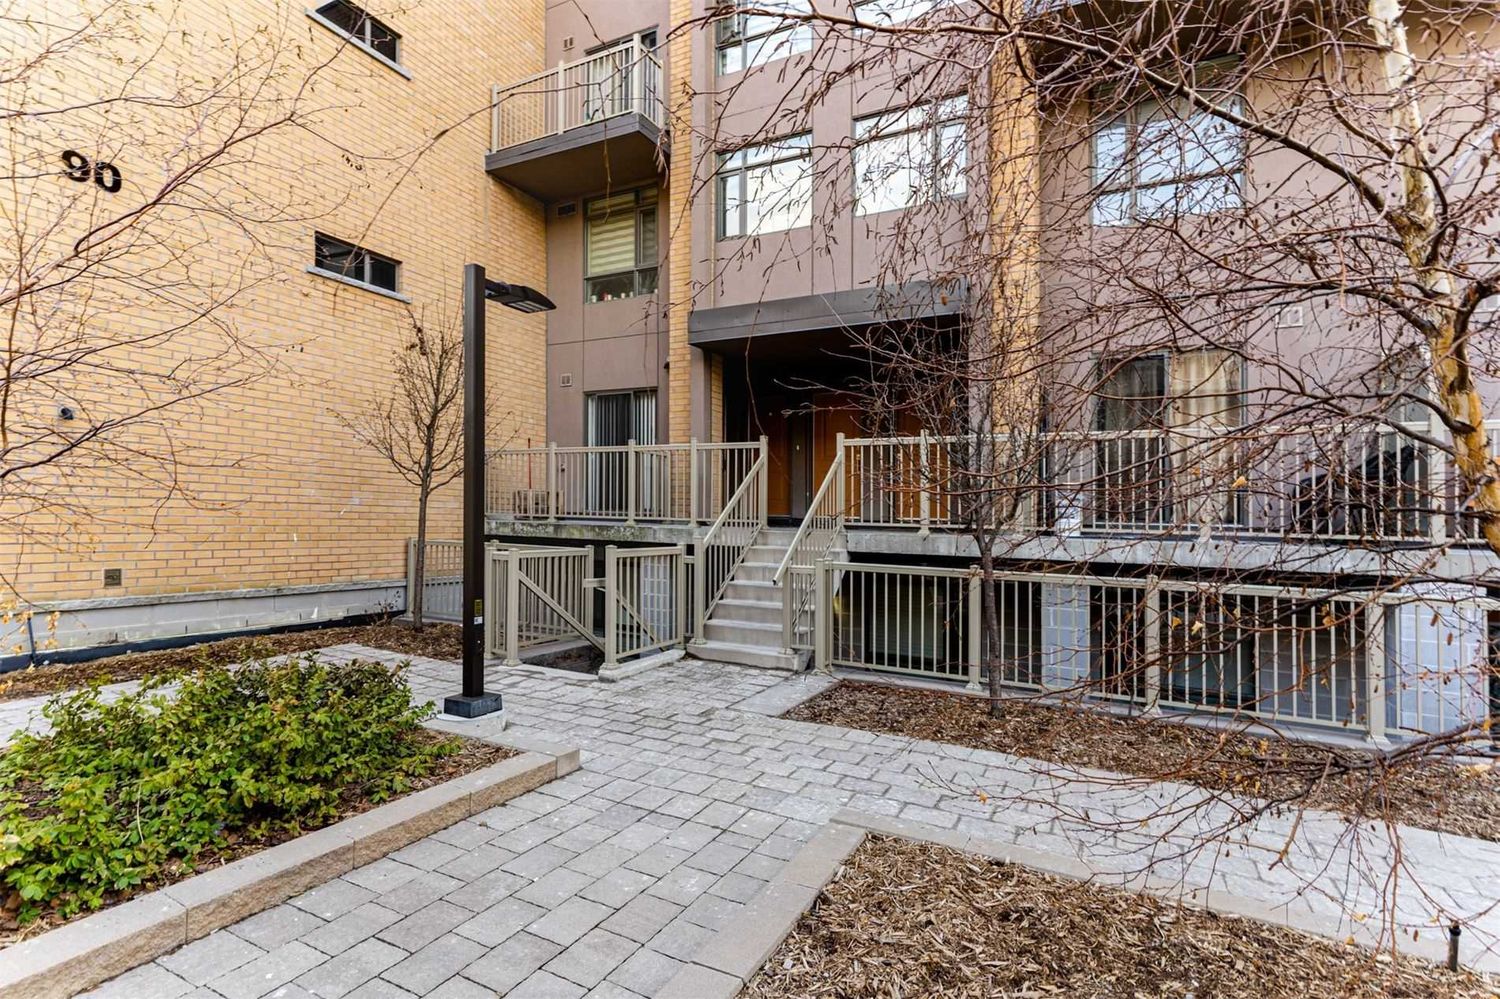 80-90 Orchid Place Drive. Orchid Place Condos is located in  Scarborough, Toronto - image #3 of 3